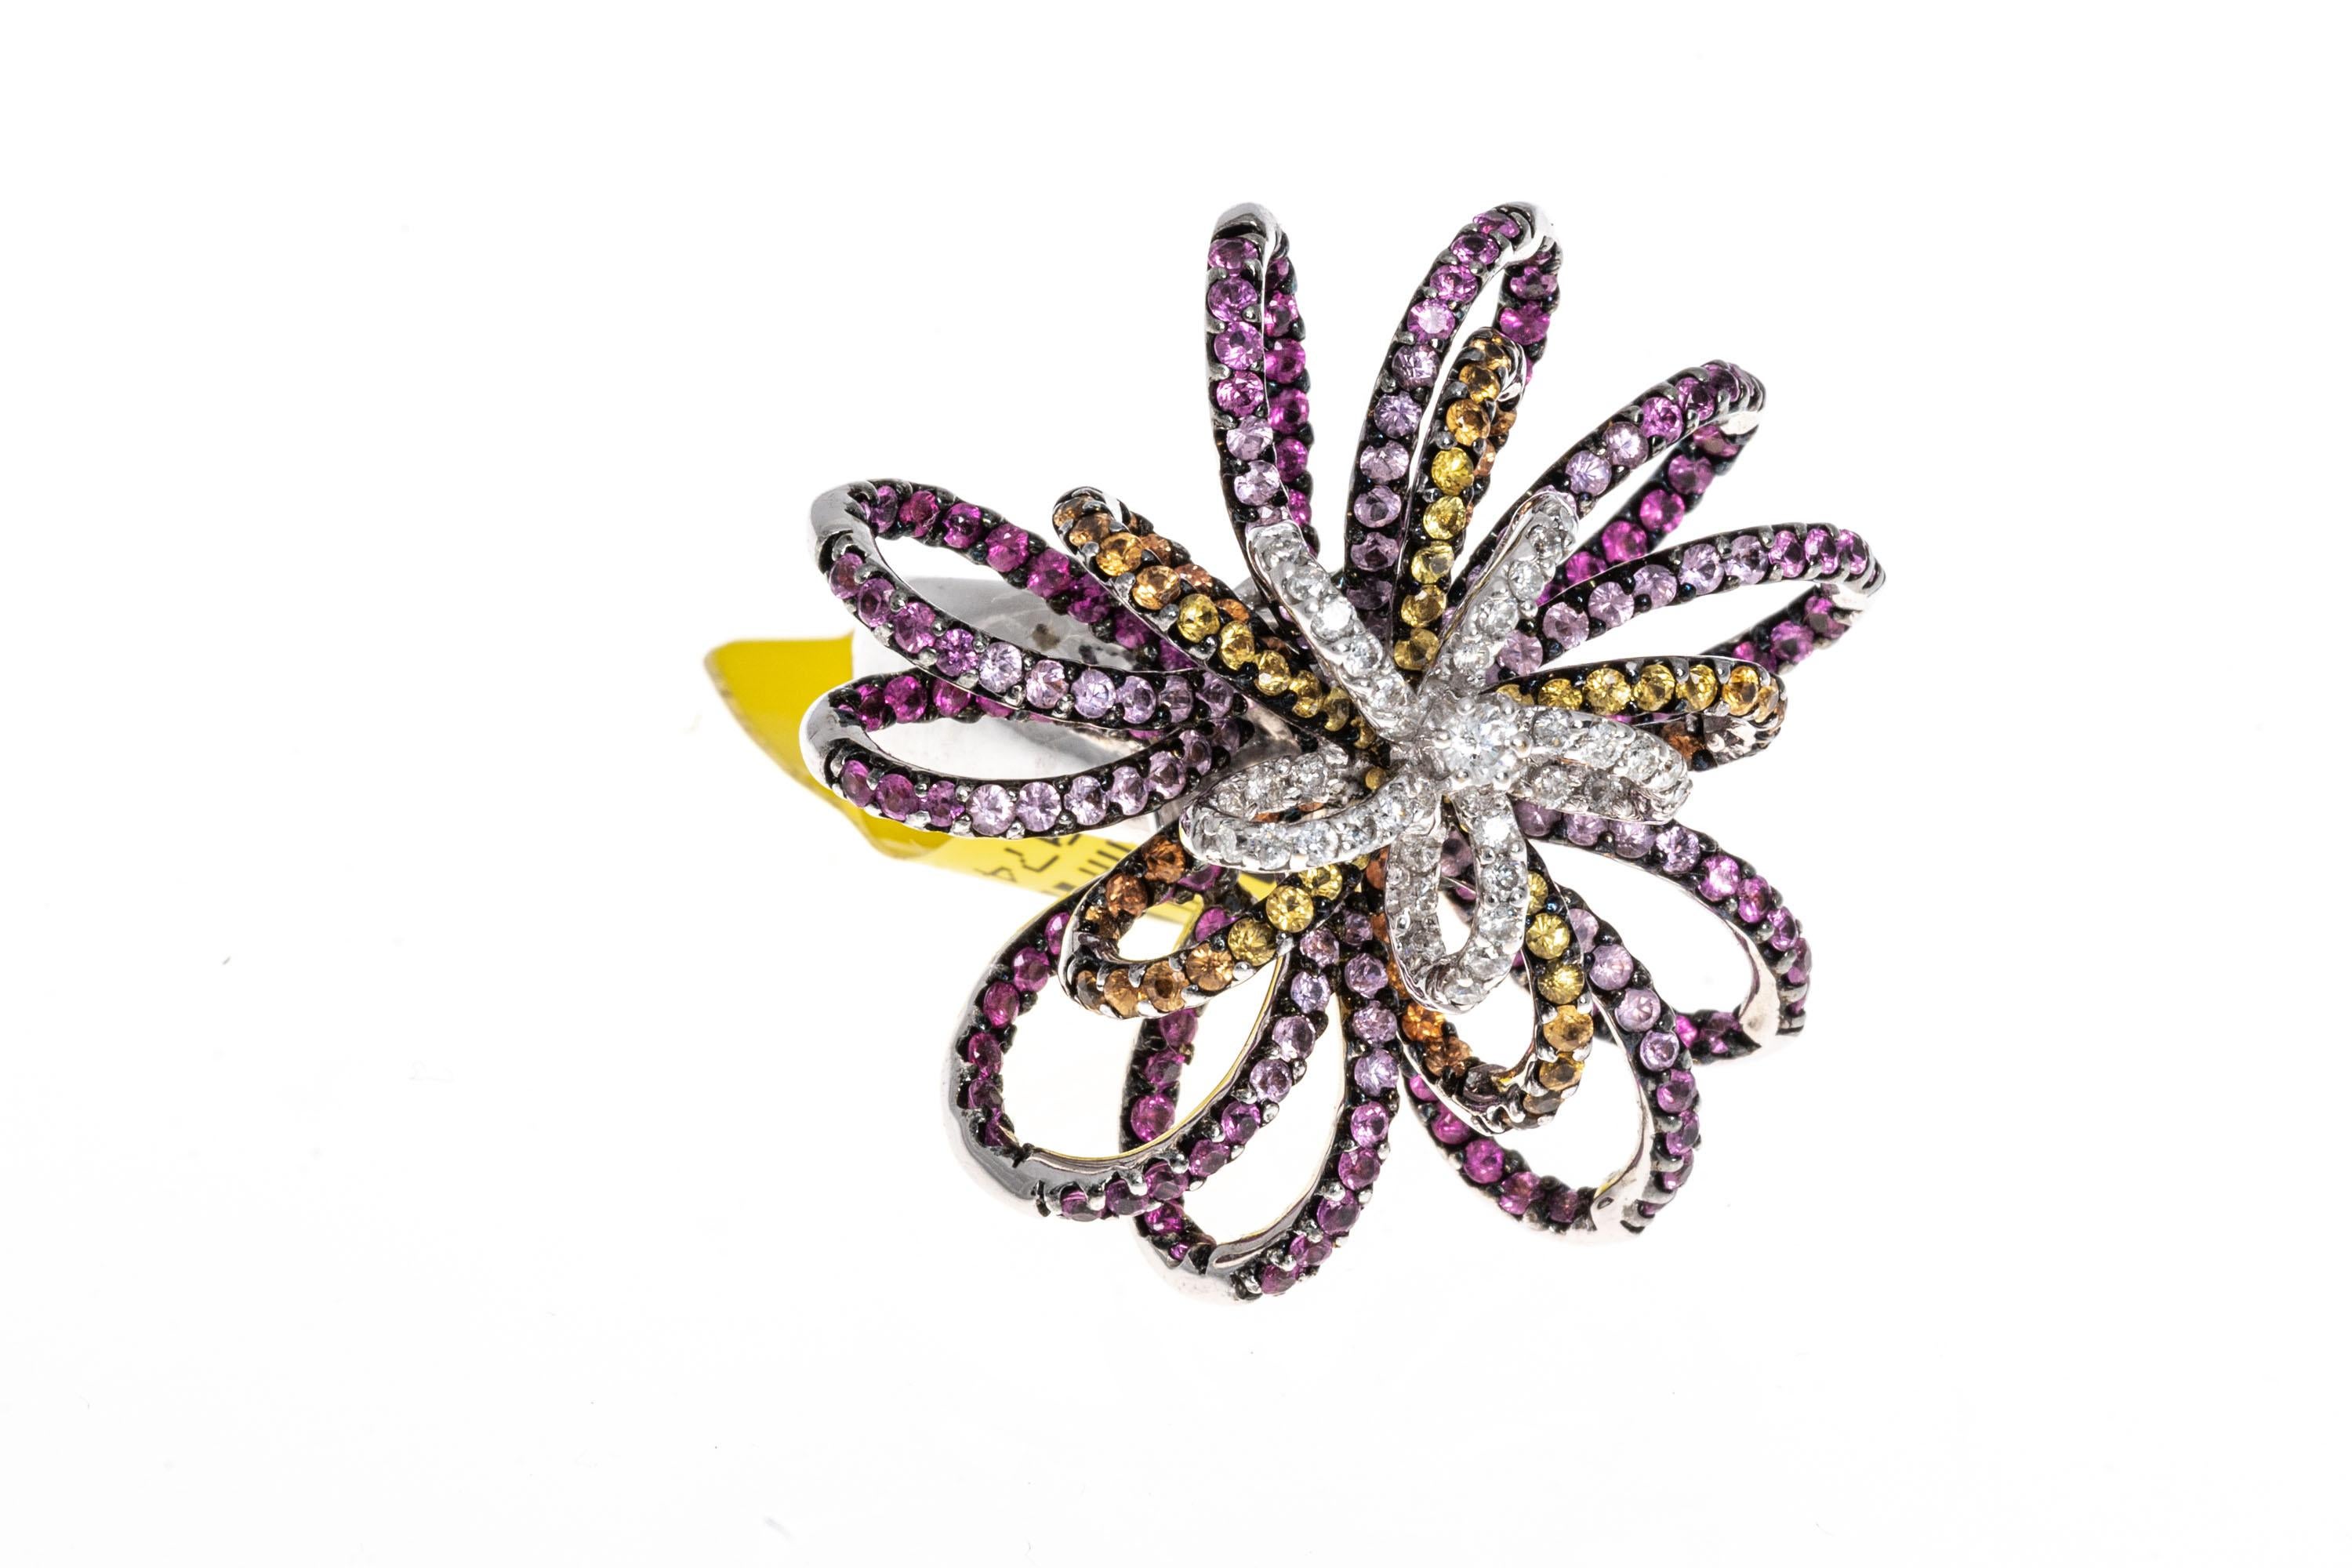 18k white gold ring. This amazing ring is a flower motif, consisting of open loops set with ombre dark to light pink round faceted sapphires, alternating with ombre dark to light yellow round faceted sapphires, all prong set. In the center are round